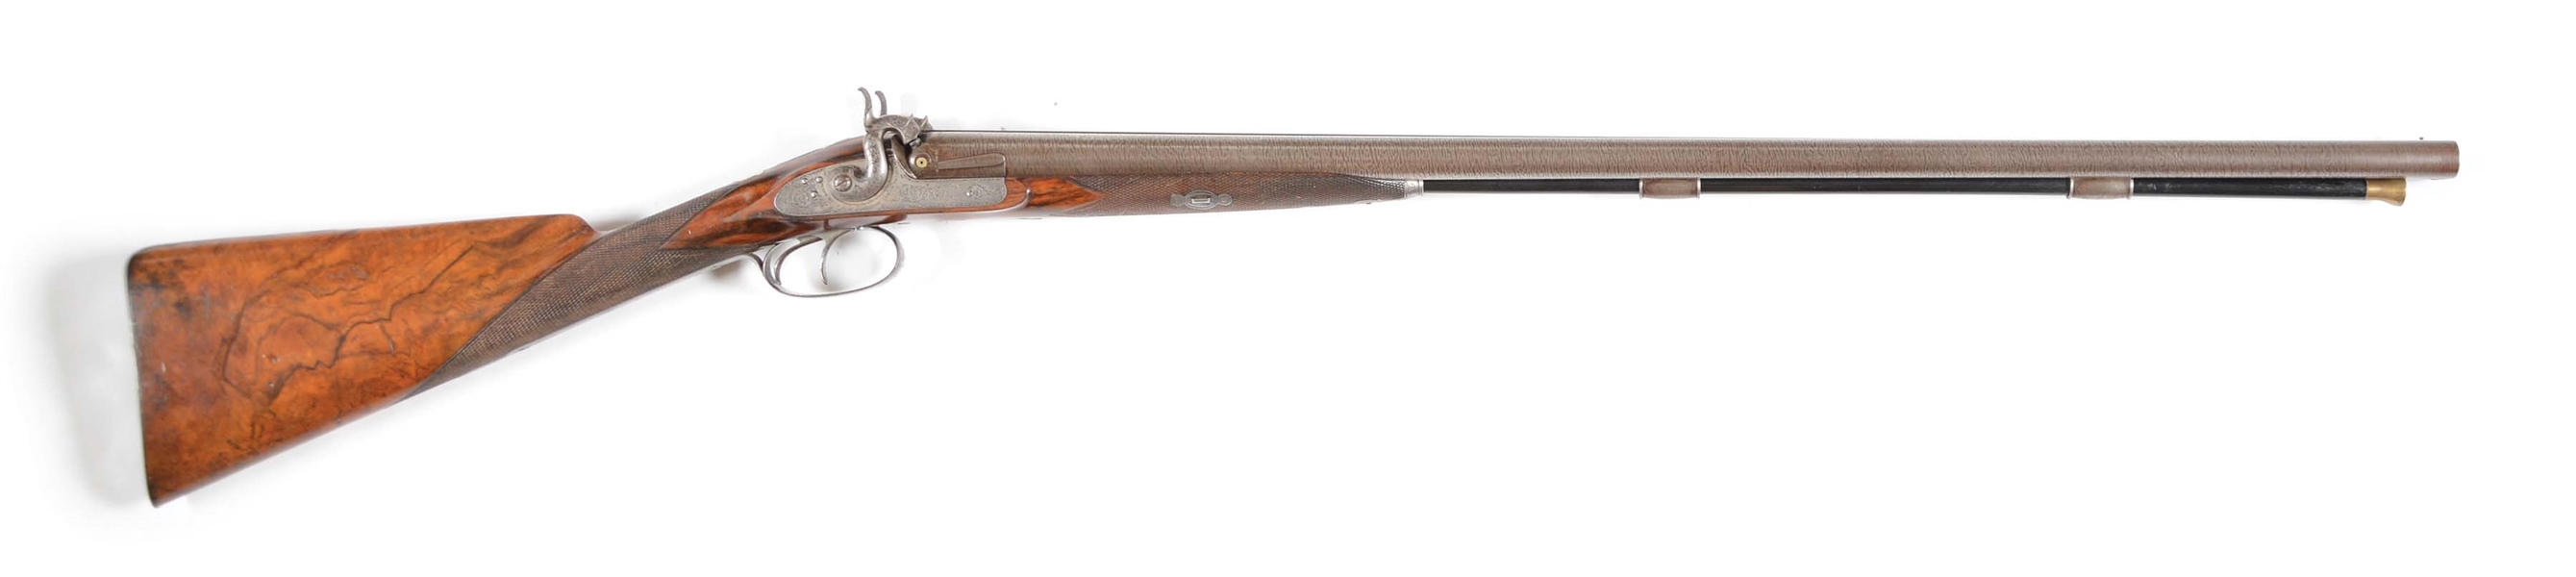 (A) FINELY MADE 14 BORE J & M LAMARCHE SIDE BY SIDE PERCUSSION SHOTGUN.